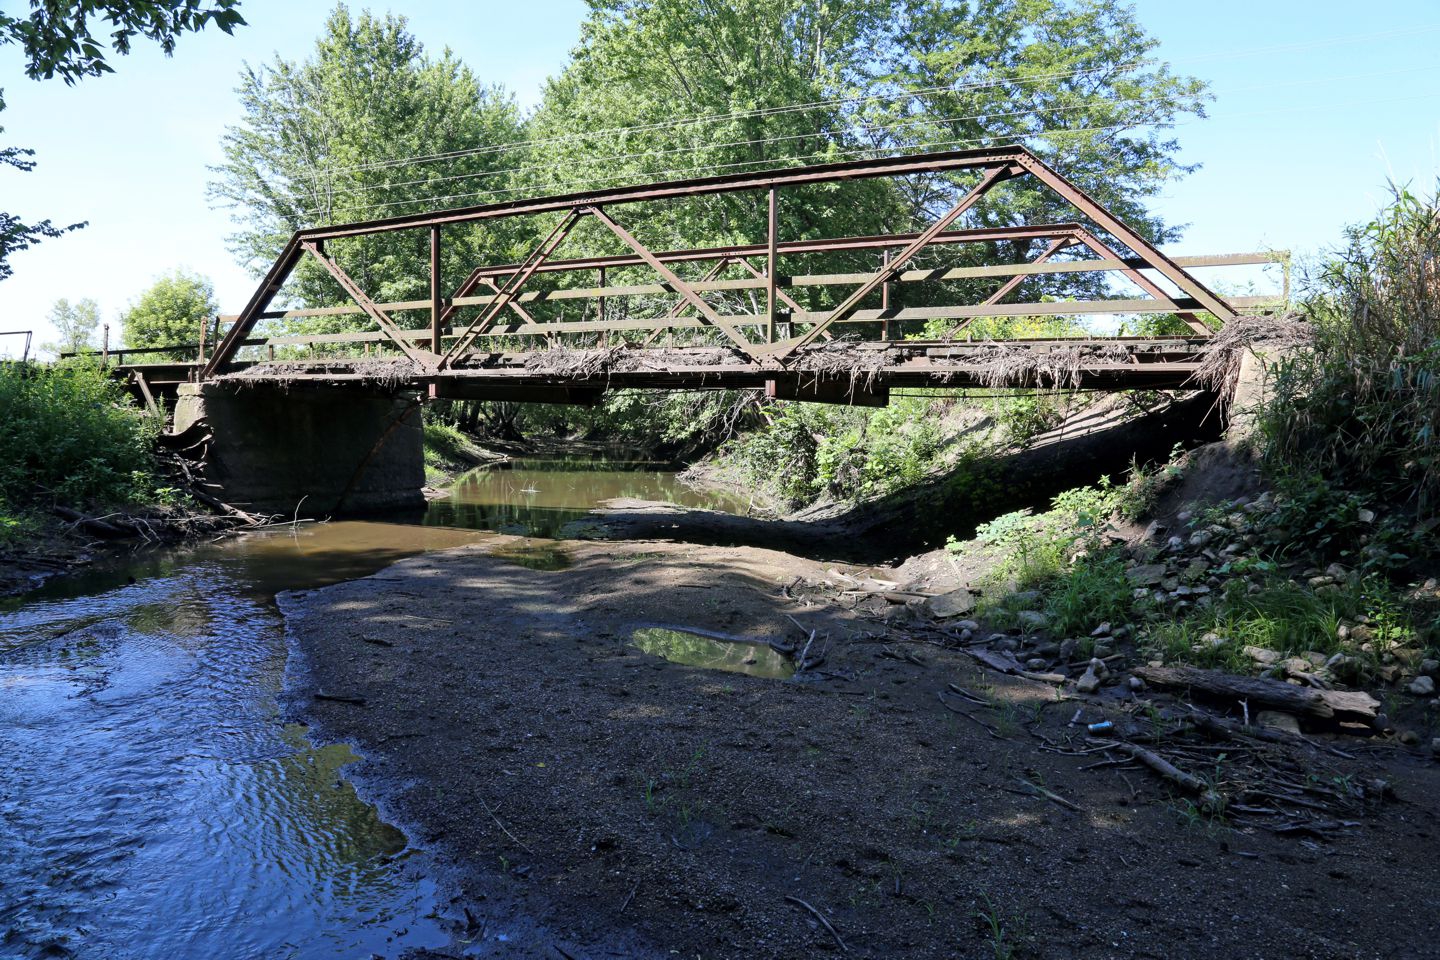 Greene Township, TR 202 Bridge over Panther Creek (HIER WD-2019-1)